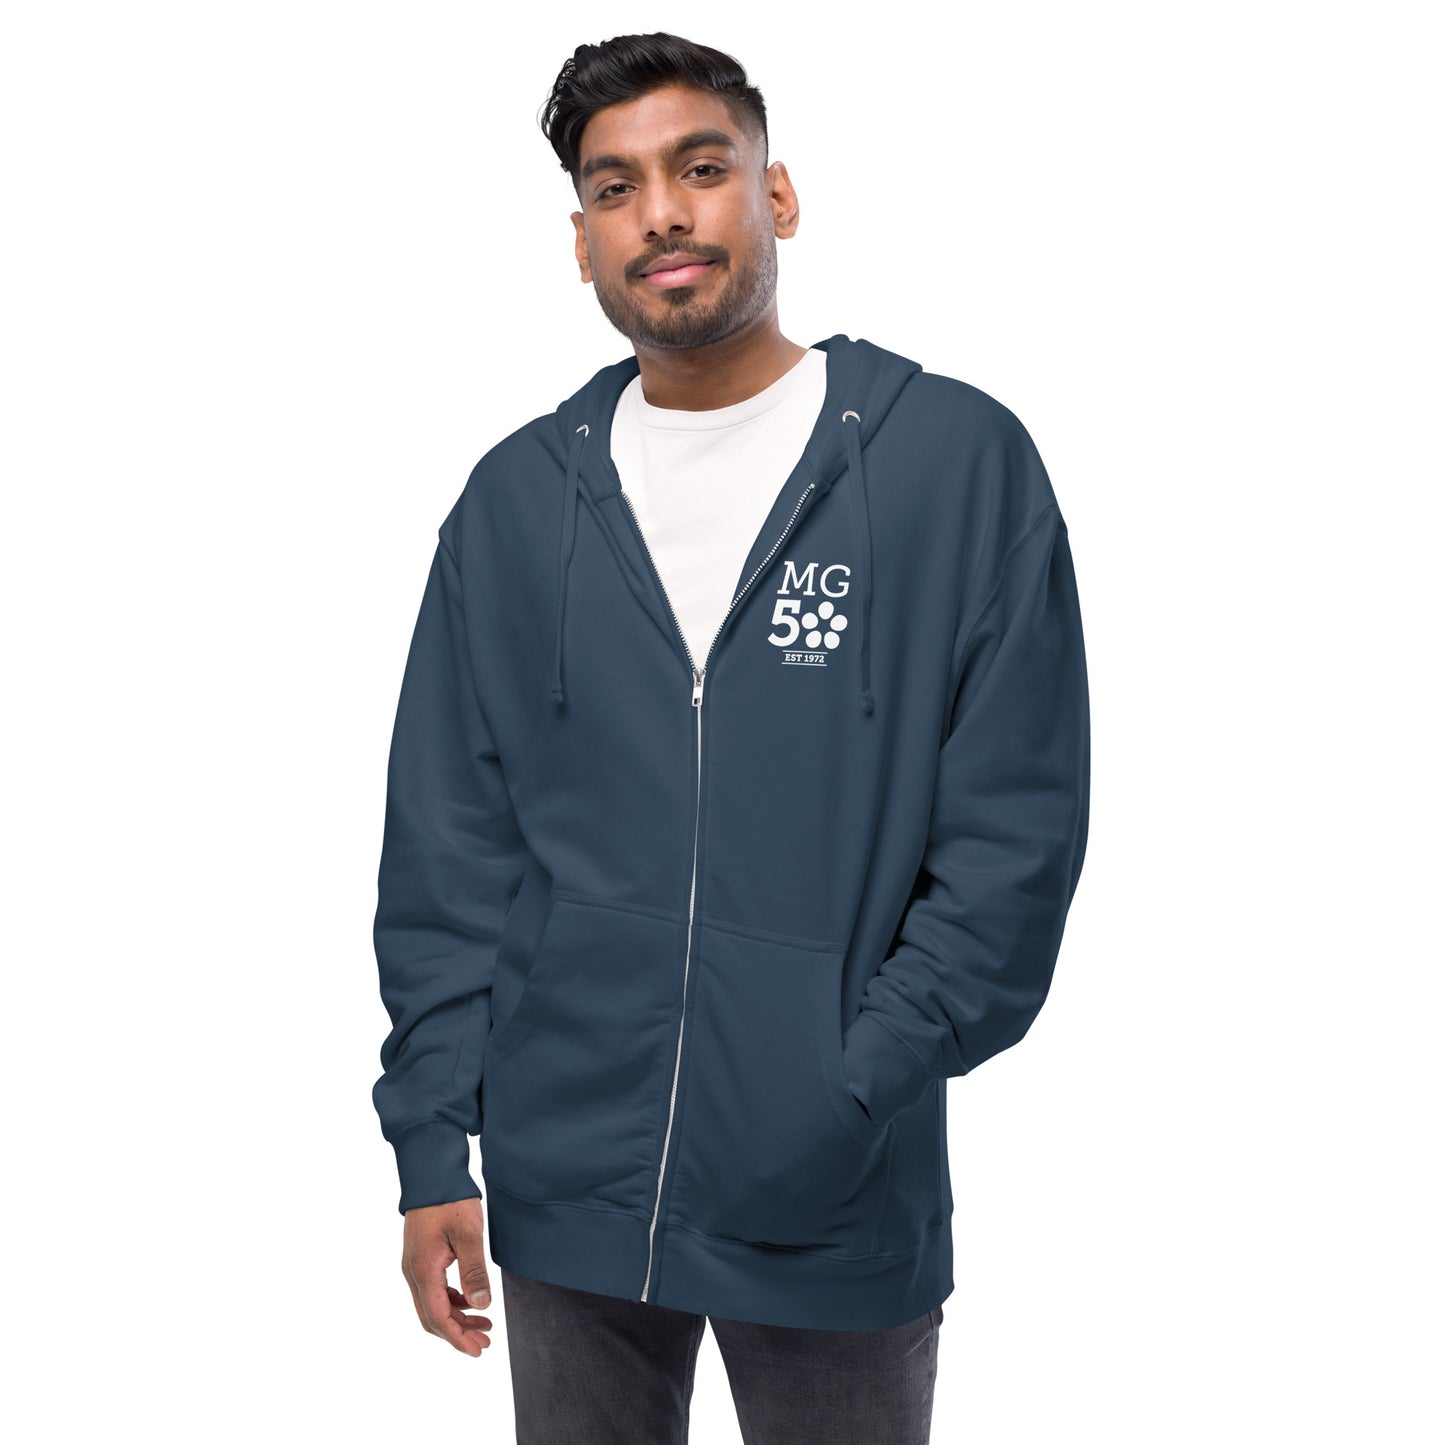 Mission Graduates Unisex Fleece Zip Up Hoodie, Favicon Logo Front Chest with Full Logo Print on Reverse, Available in Three Colors